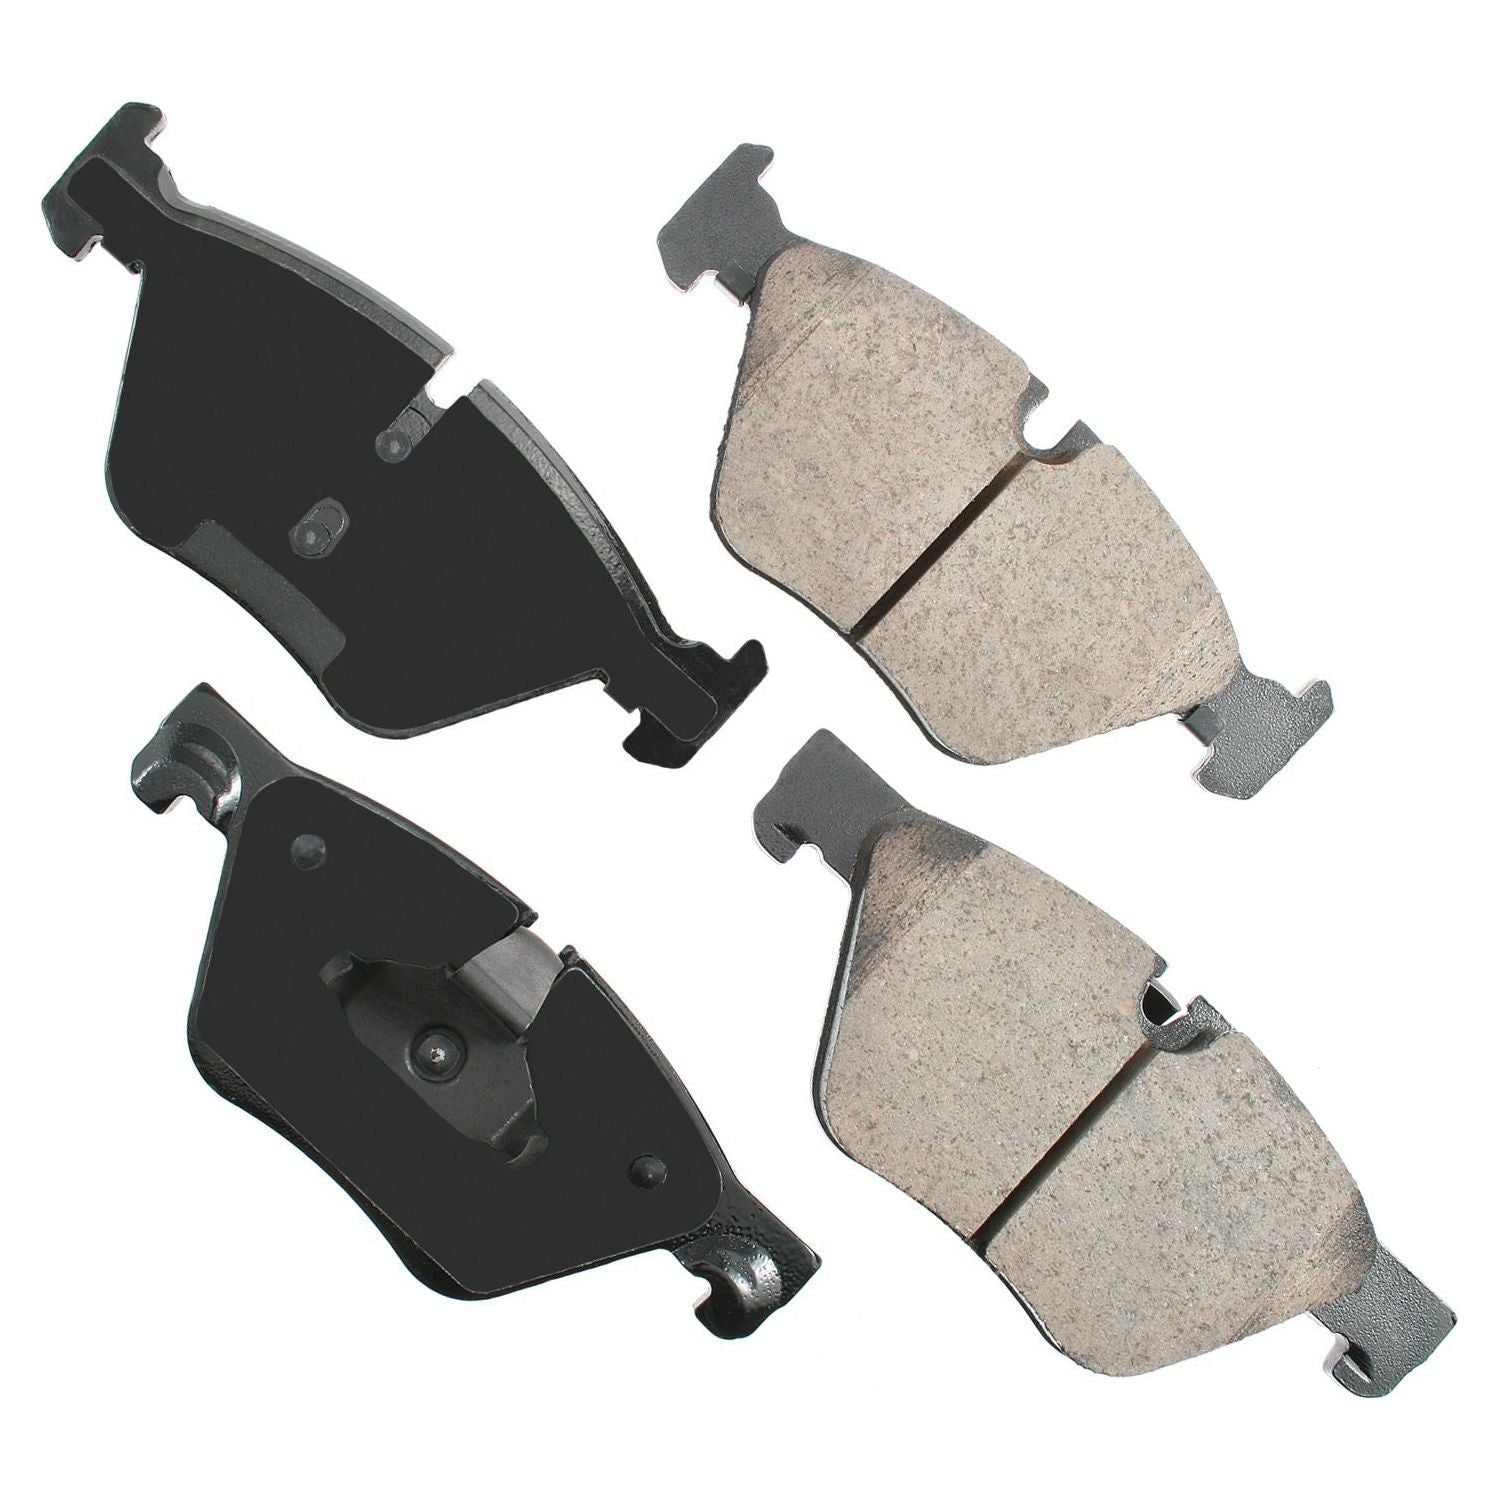 AKEBONO EUR 1504.00 - Brake Pads Front BMW 528i 11-16 xDrive 12-16 - Auto Parts Finder - Parts Ghoul